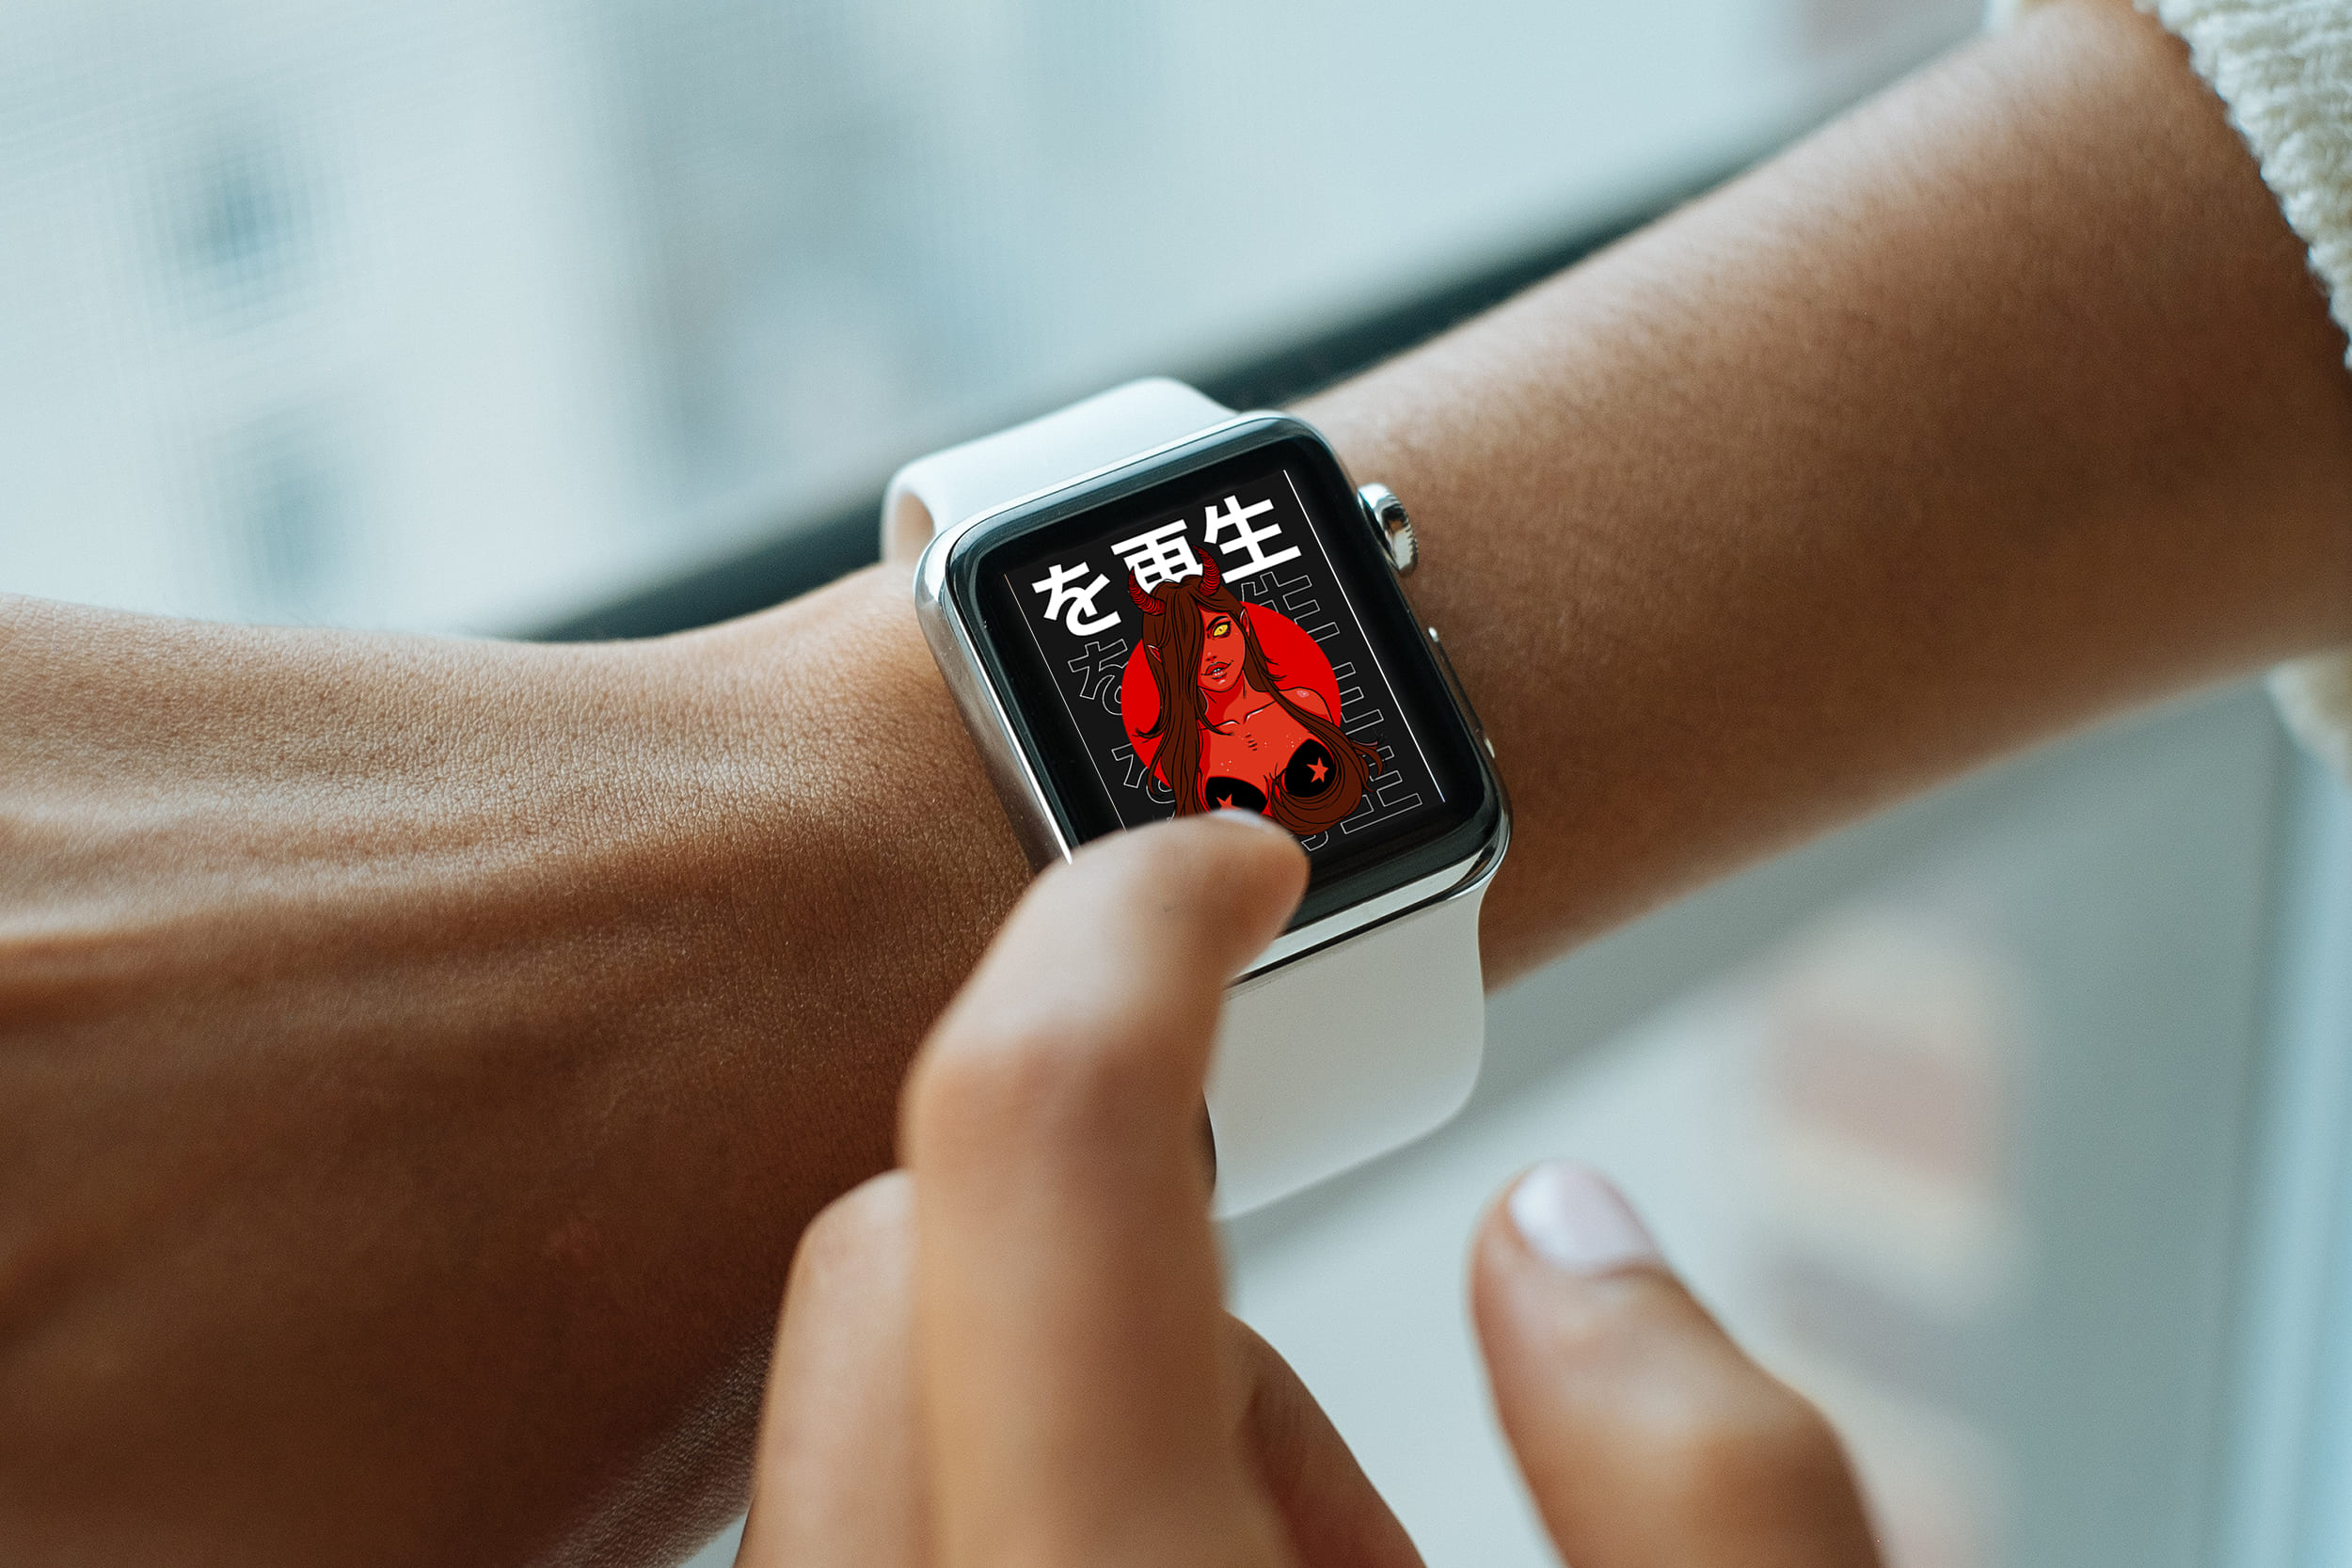 Classic apple watch with red anime.